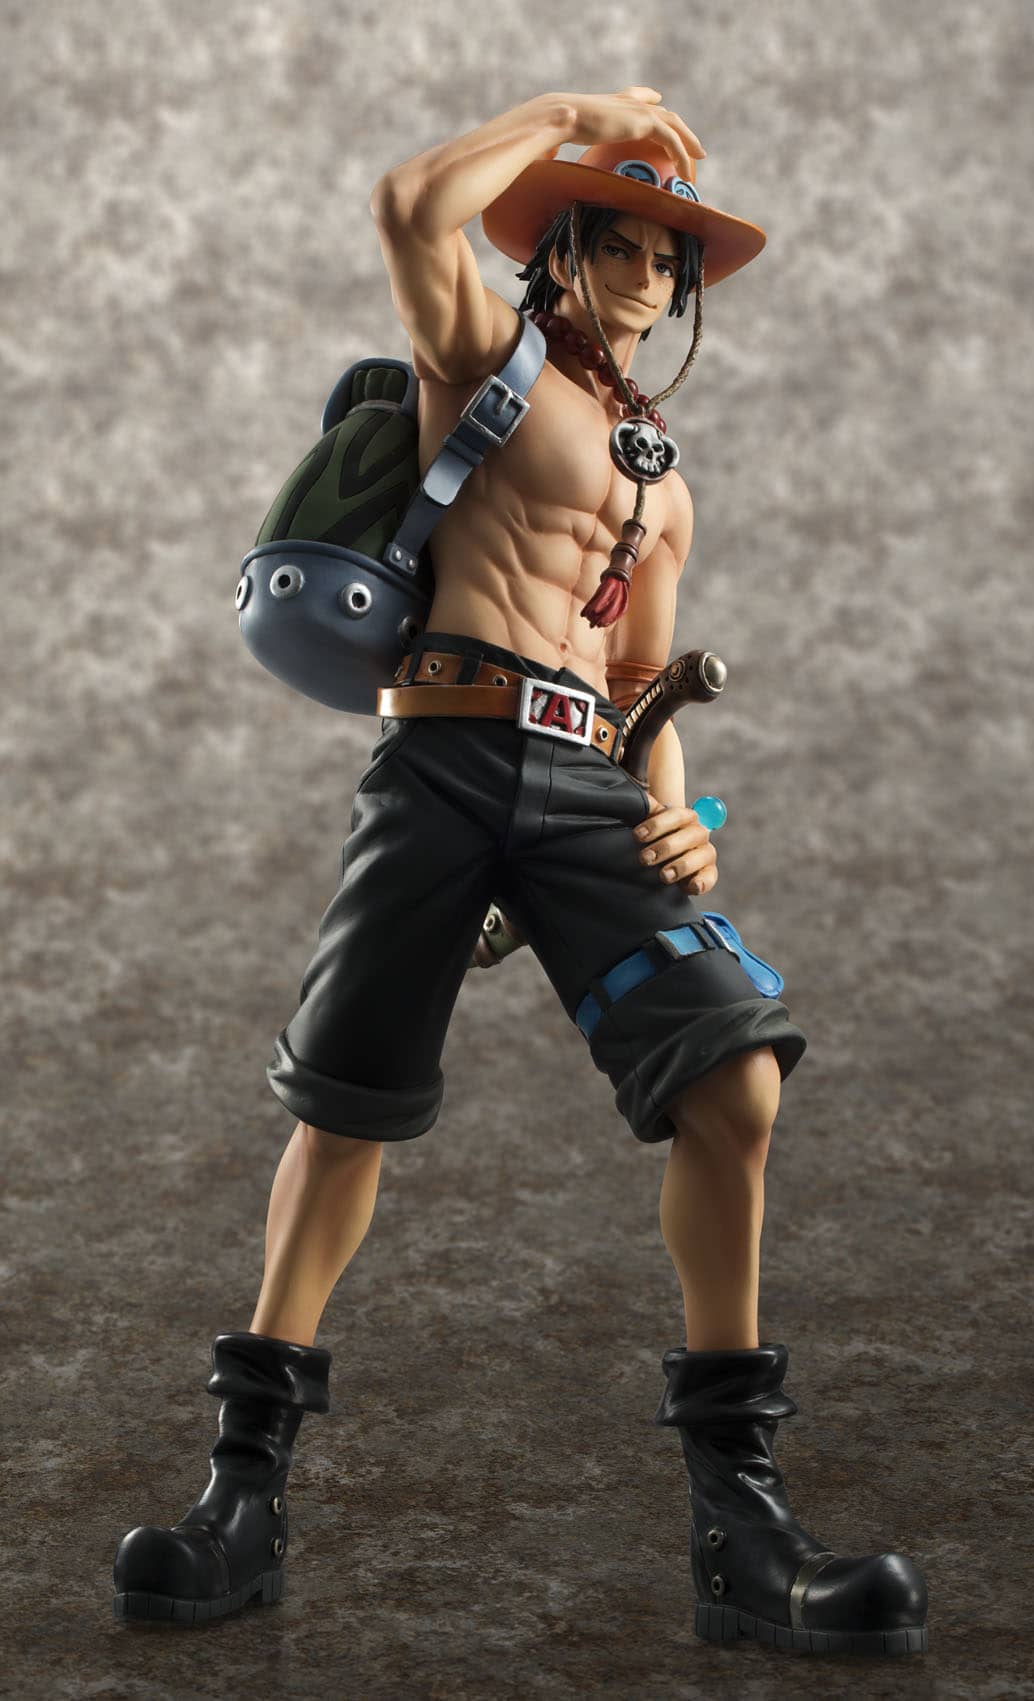 PORTGAS D. ACE 10 TH LIMITED VERSION FIGURA 23 CM ONE PIECE P.O.P. NEO-DX